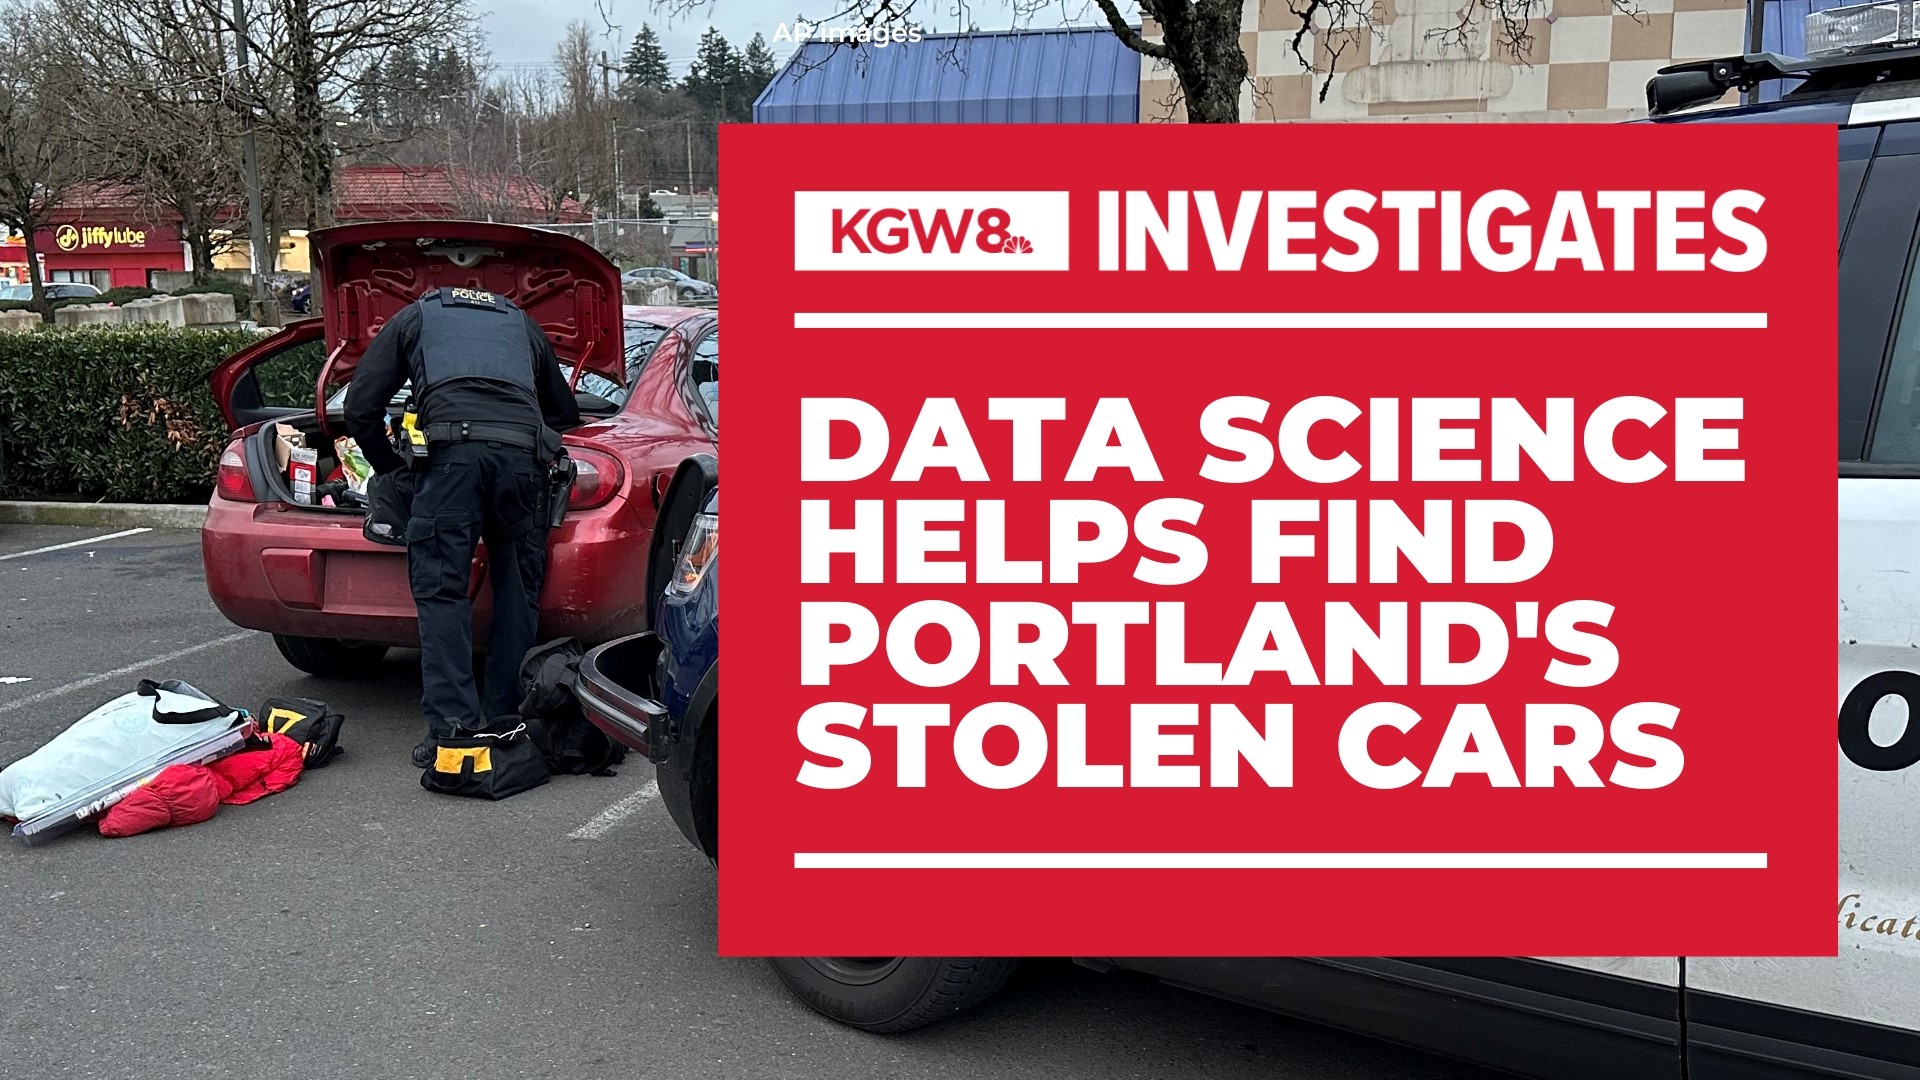 Working with limited resources to combat a growing car theft problem, police have switched to a data-driven approach that they say has yielded better results.